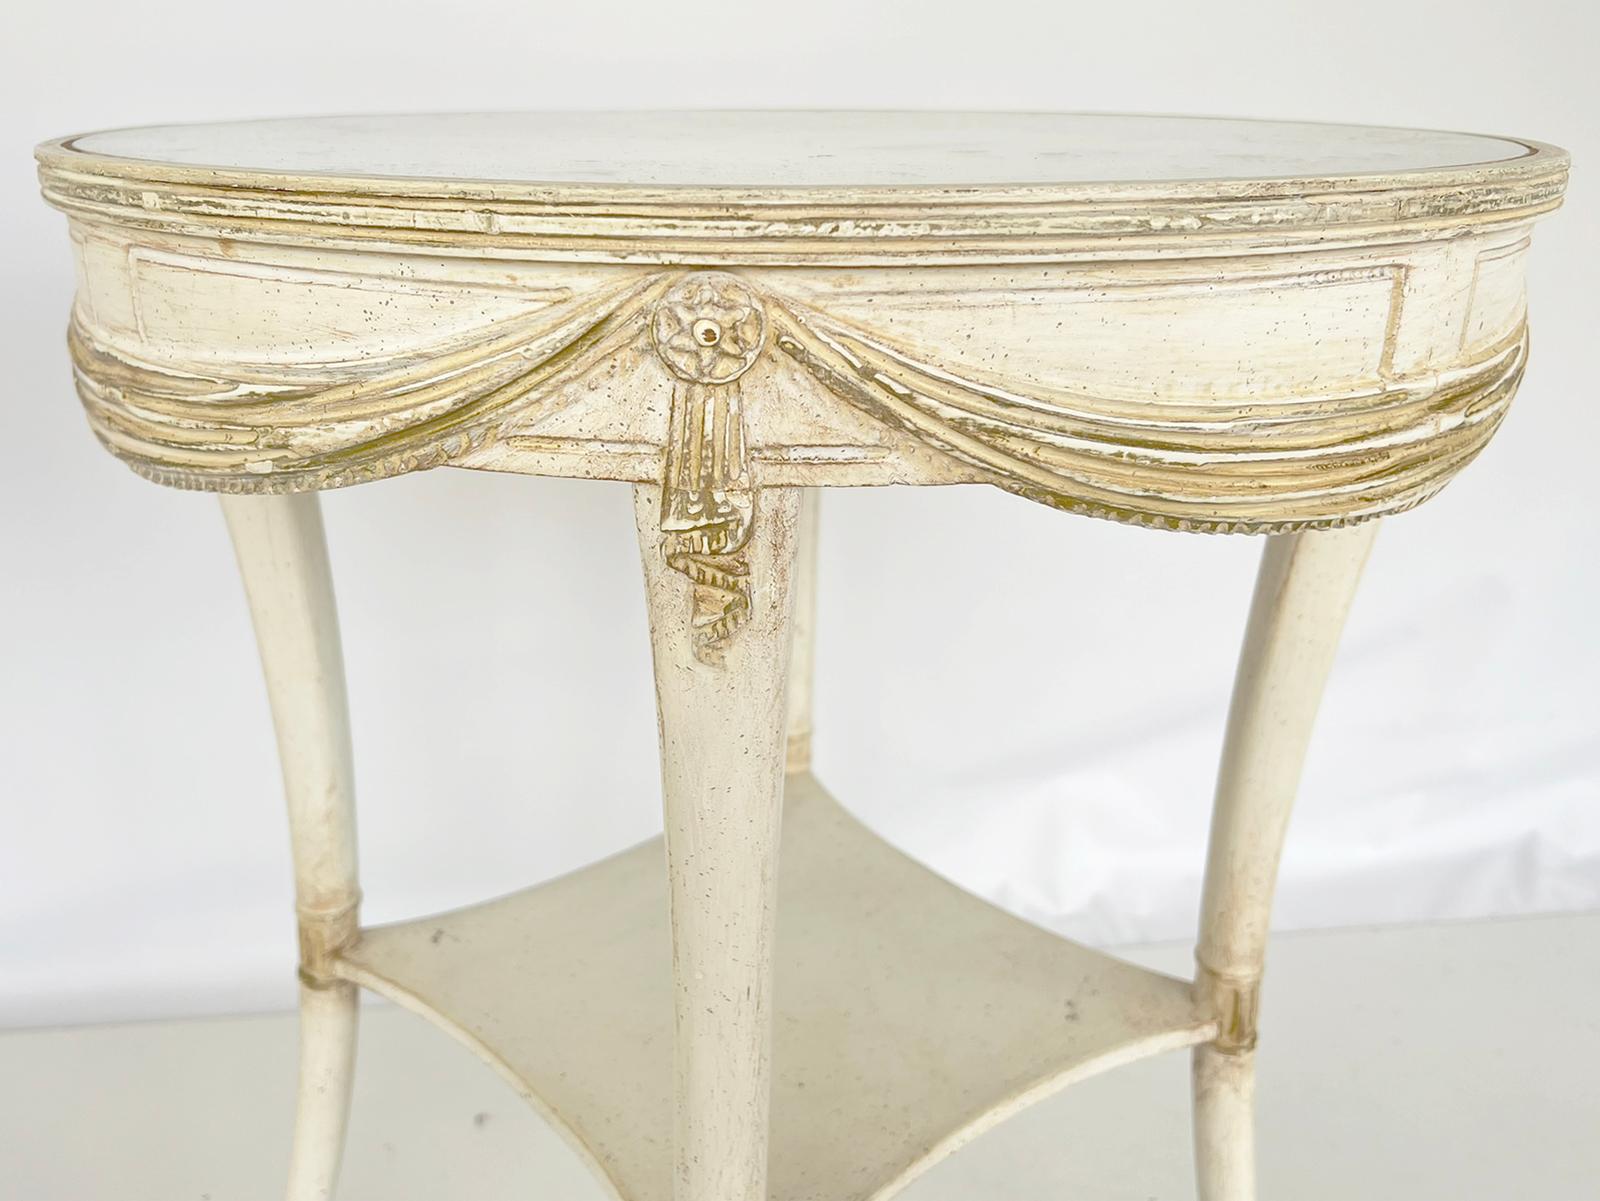 Swag-carved, Painted, Round Occasional Table with Mirrored Top by Grosfeld House For Sale 1